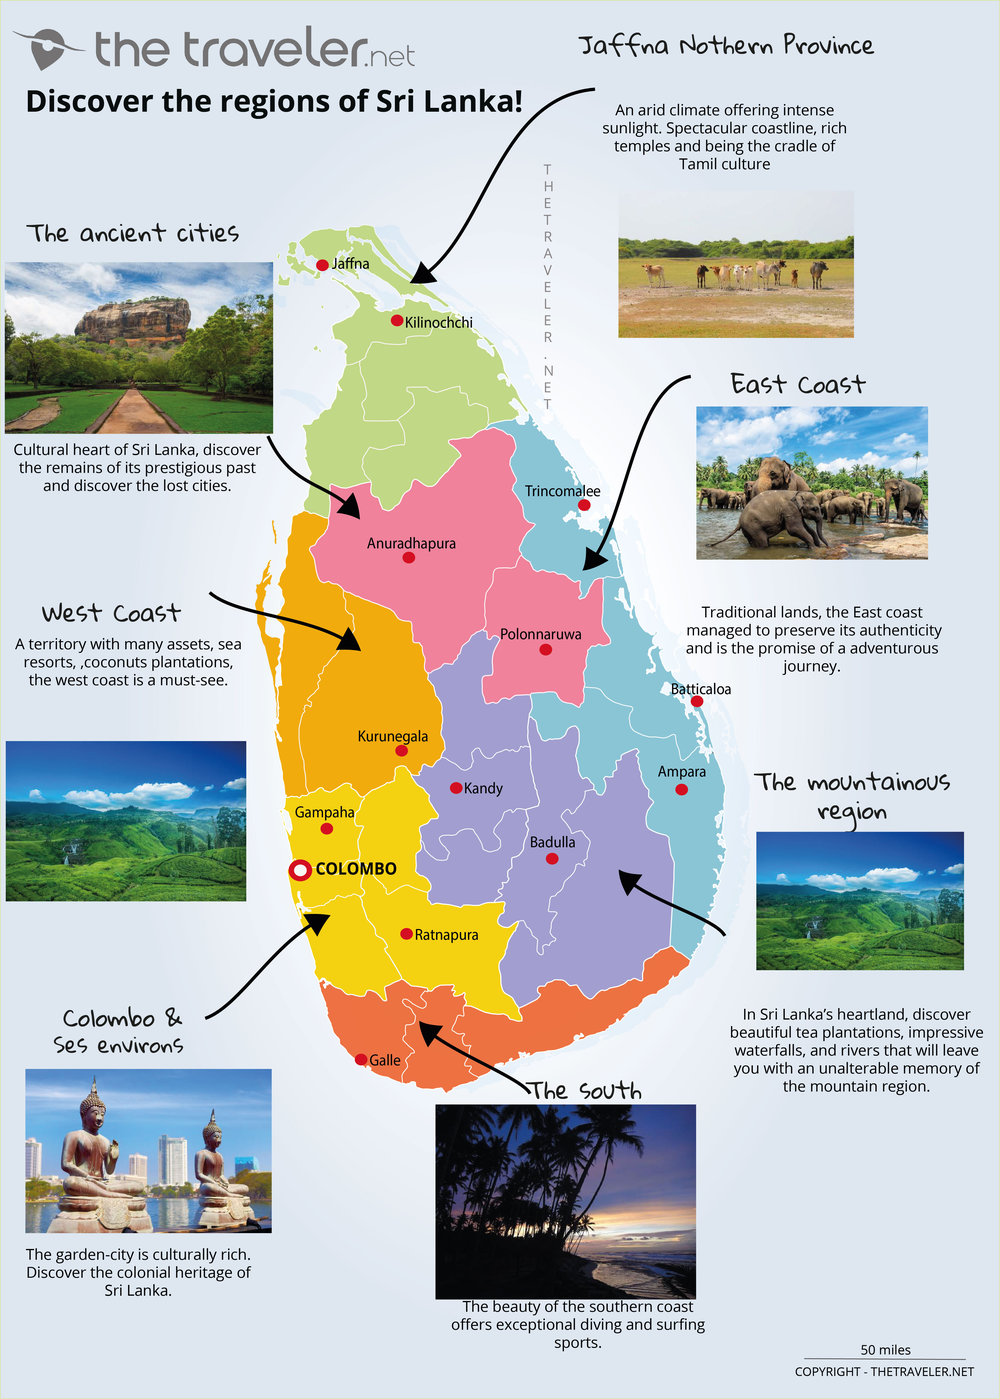 Sri Lanka Tourist Map Places to visit Sri Lanka: tourist maps and must see attractions